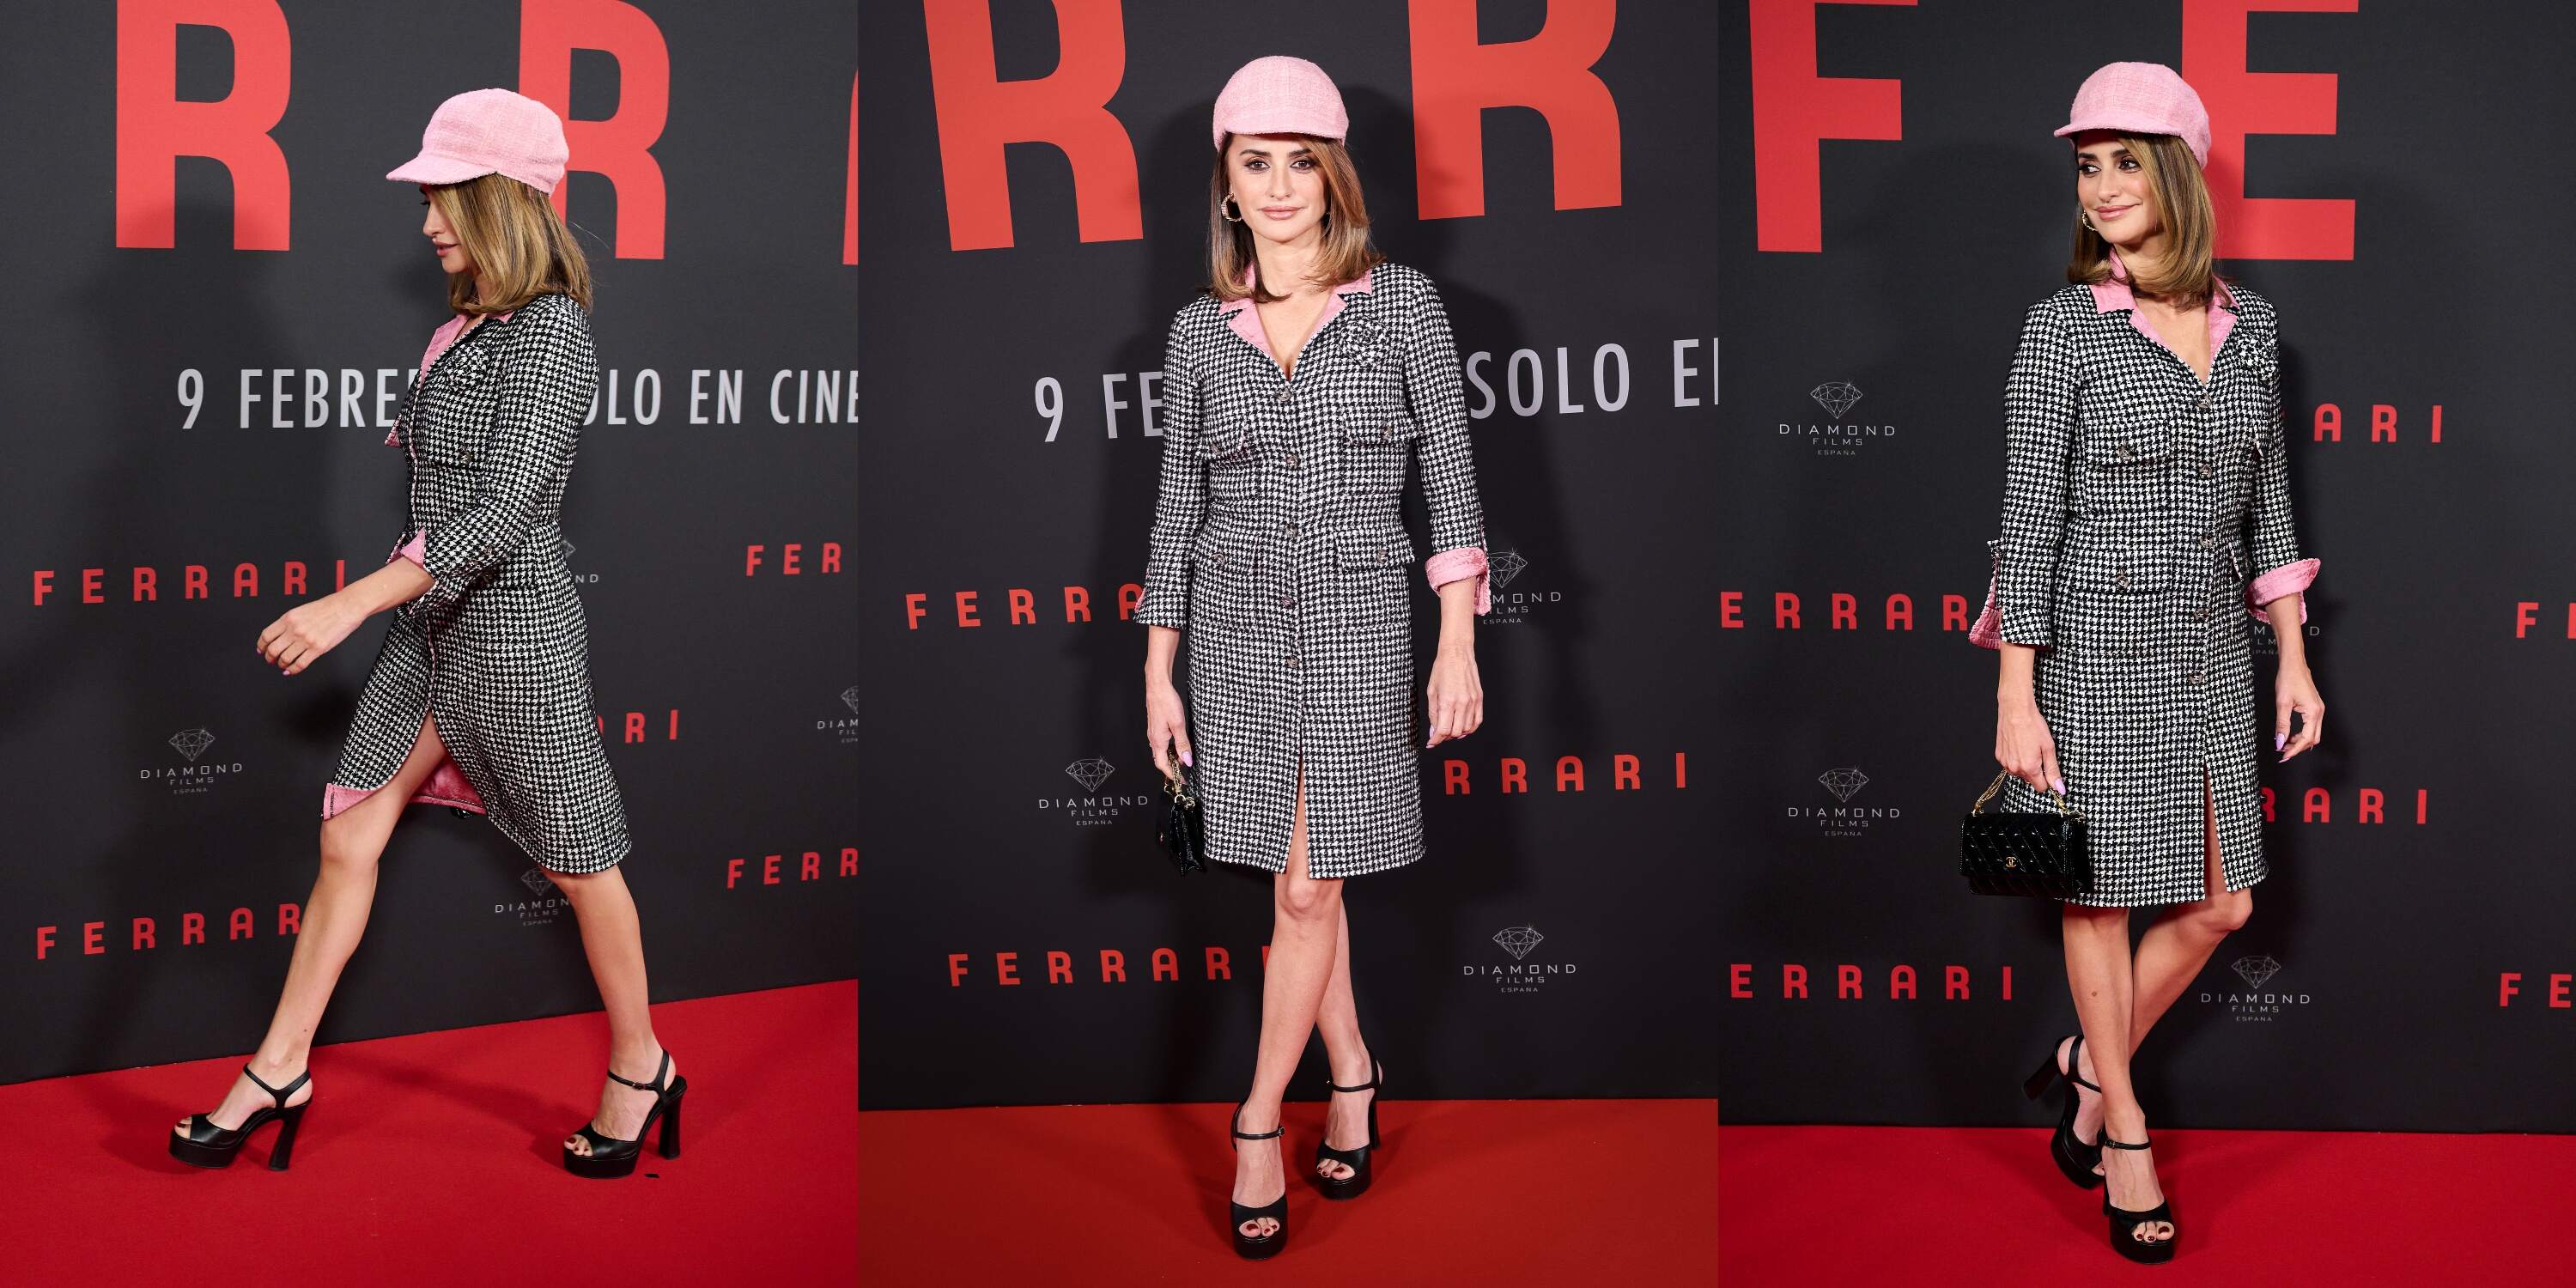 Spanish actress Penelope Cruz looks at cameras and poses in Chanel at the Madrid photocall for "Ferrari"